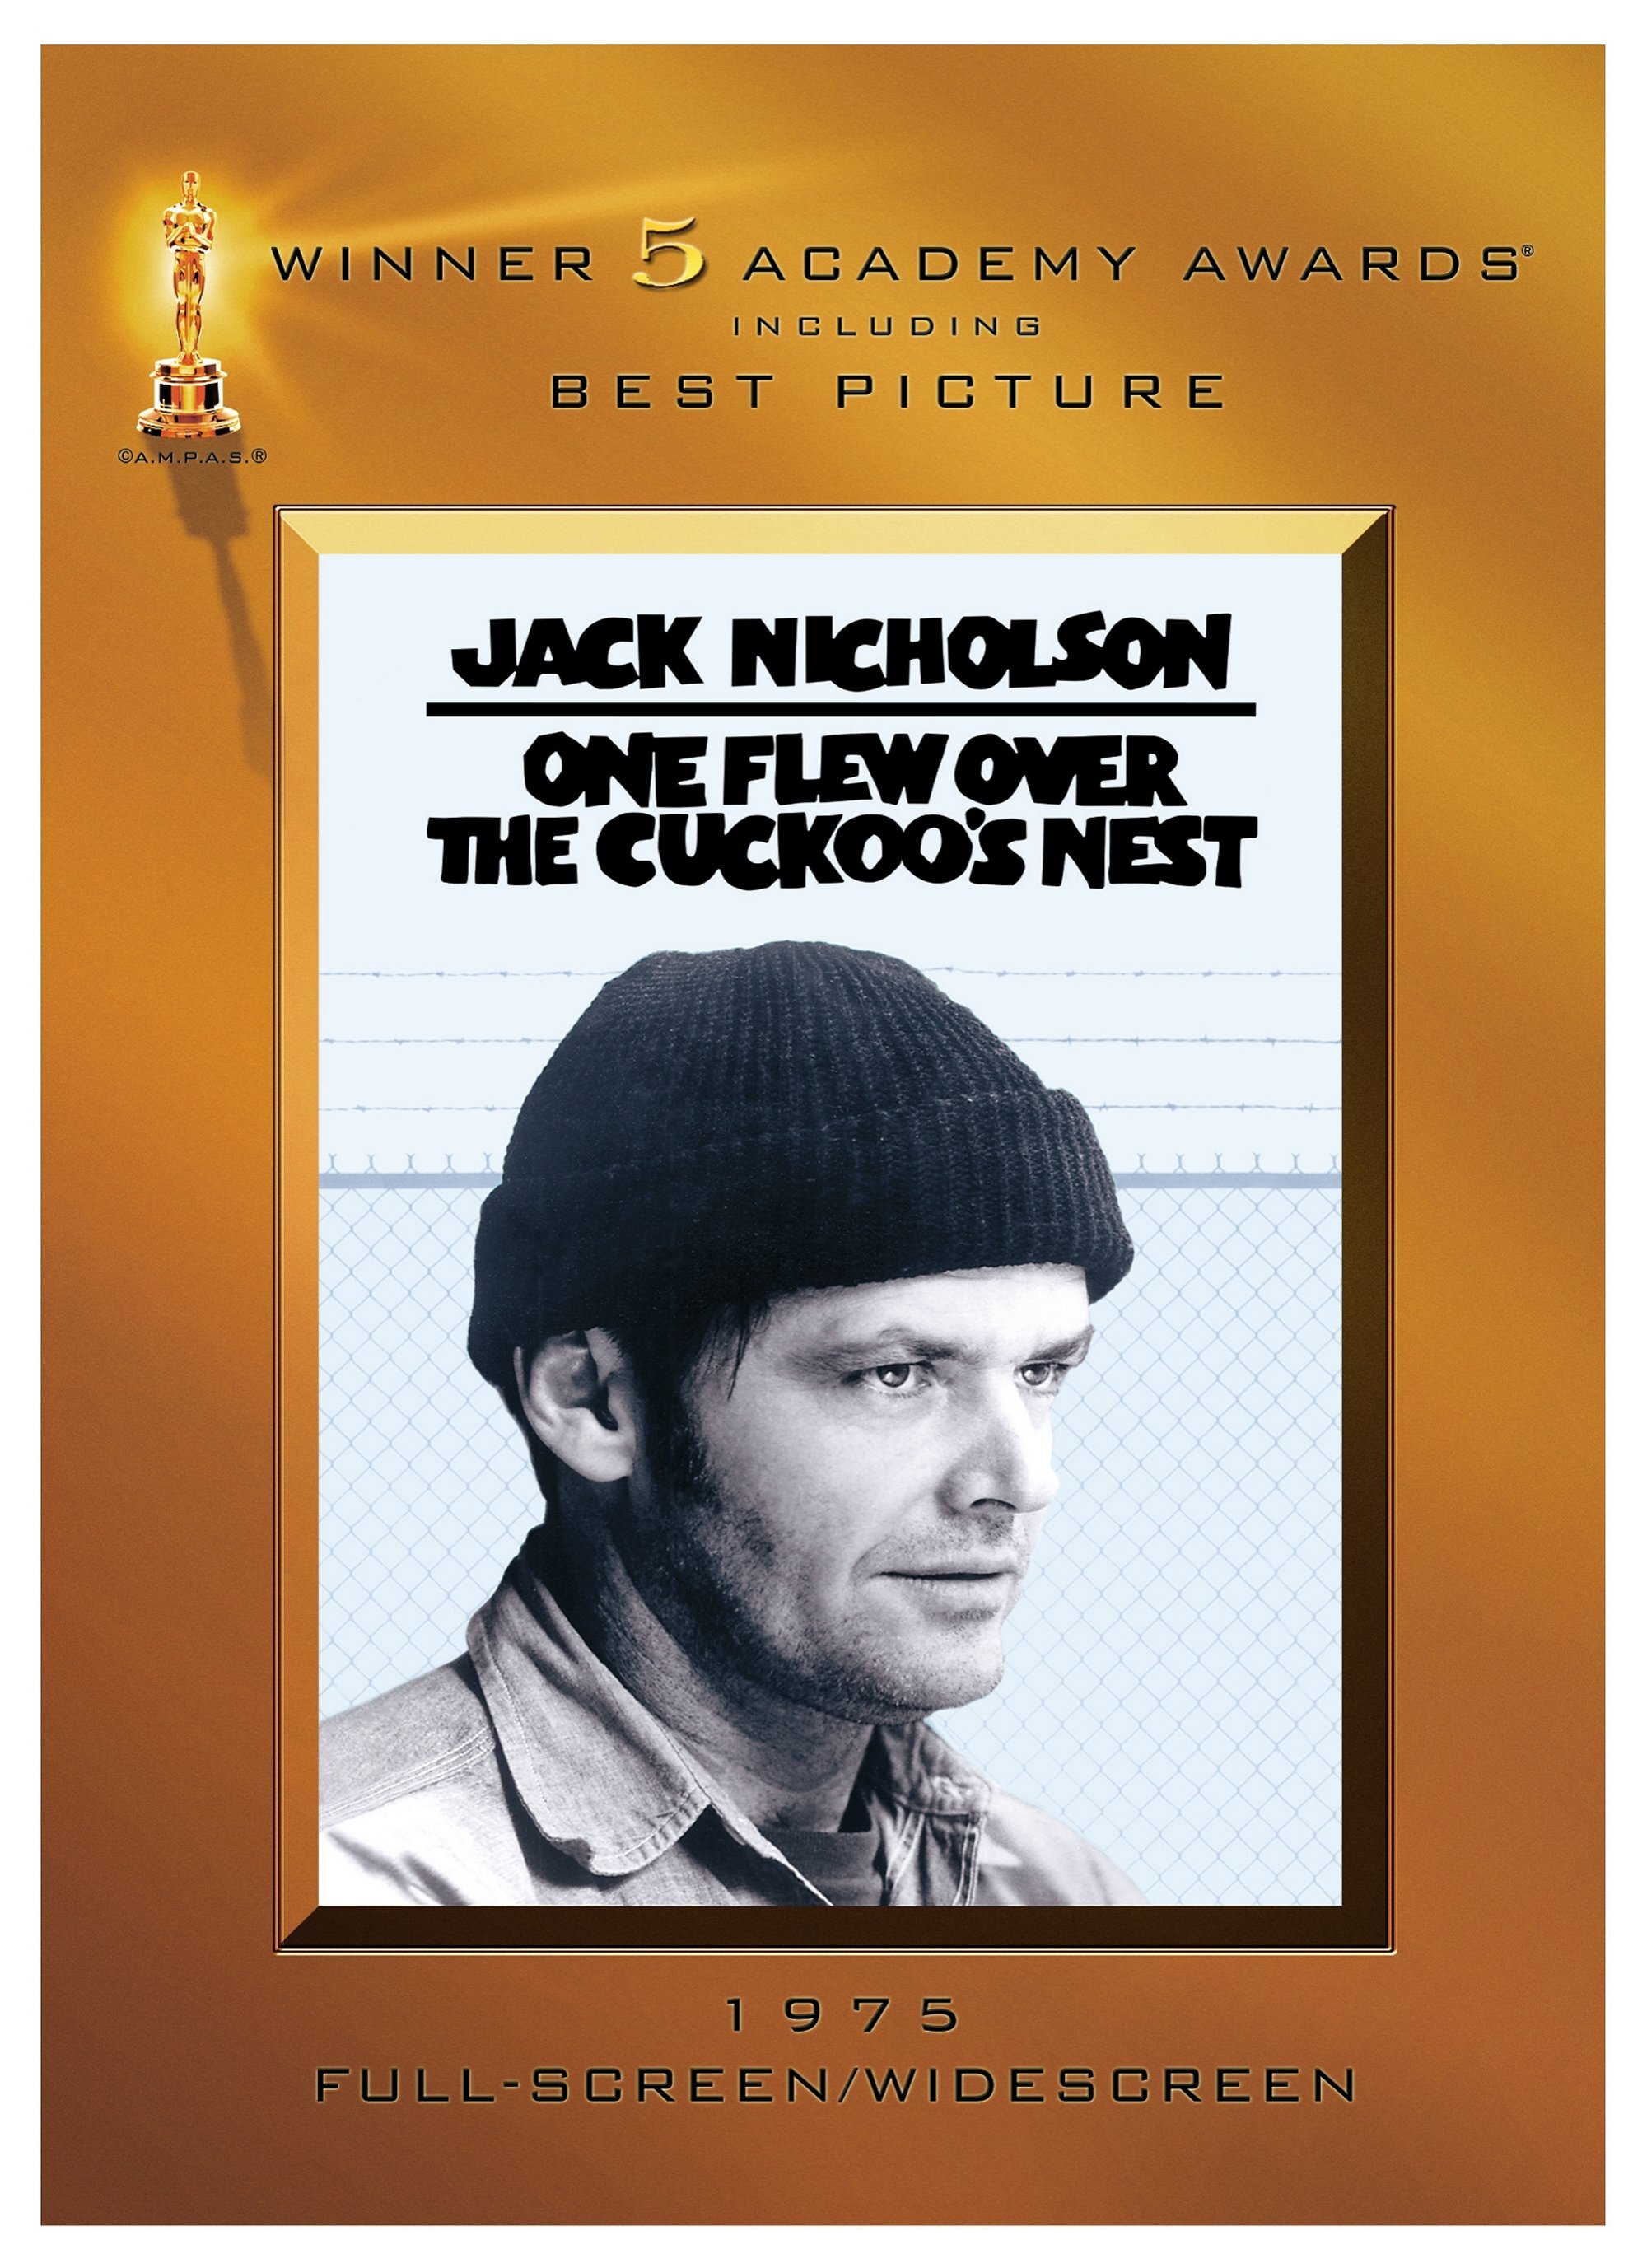 One Flew Over The Cuckoo's Nest (DVD New Packaging) - DVD [ 1975 ]  - Drama Movies On DVD - Movies On GRUV